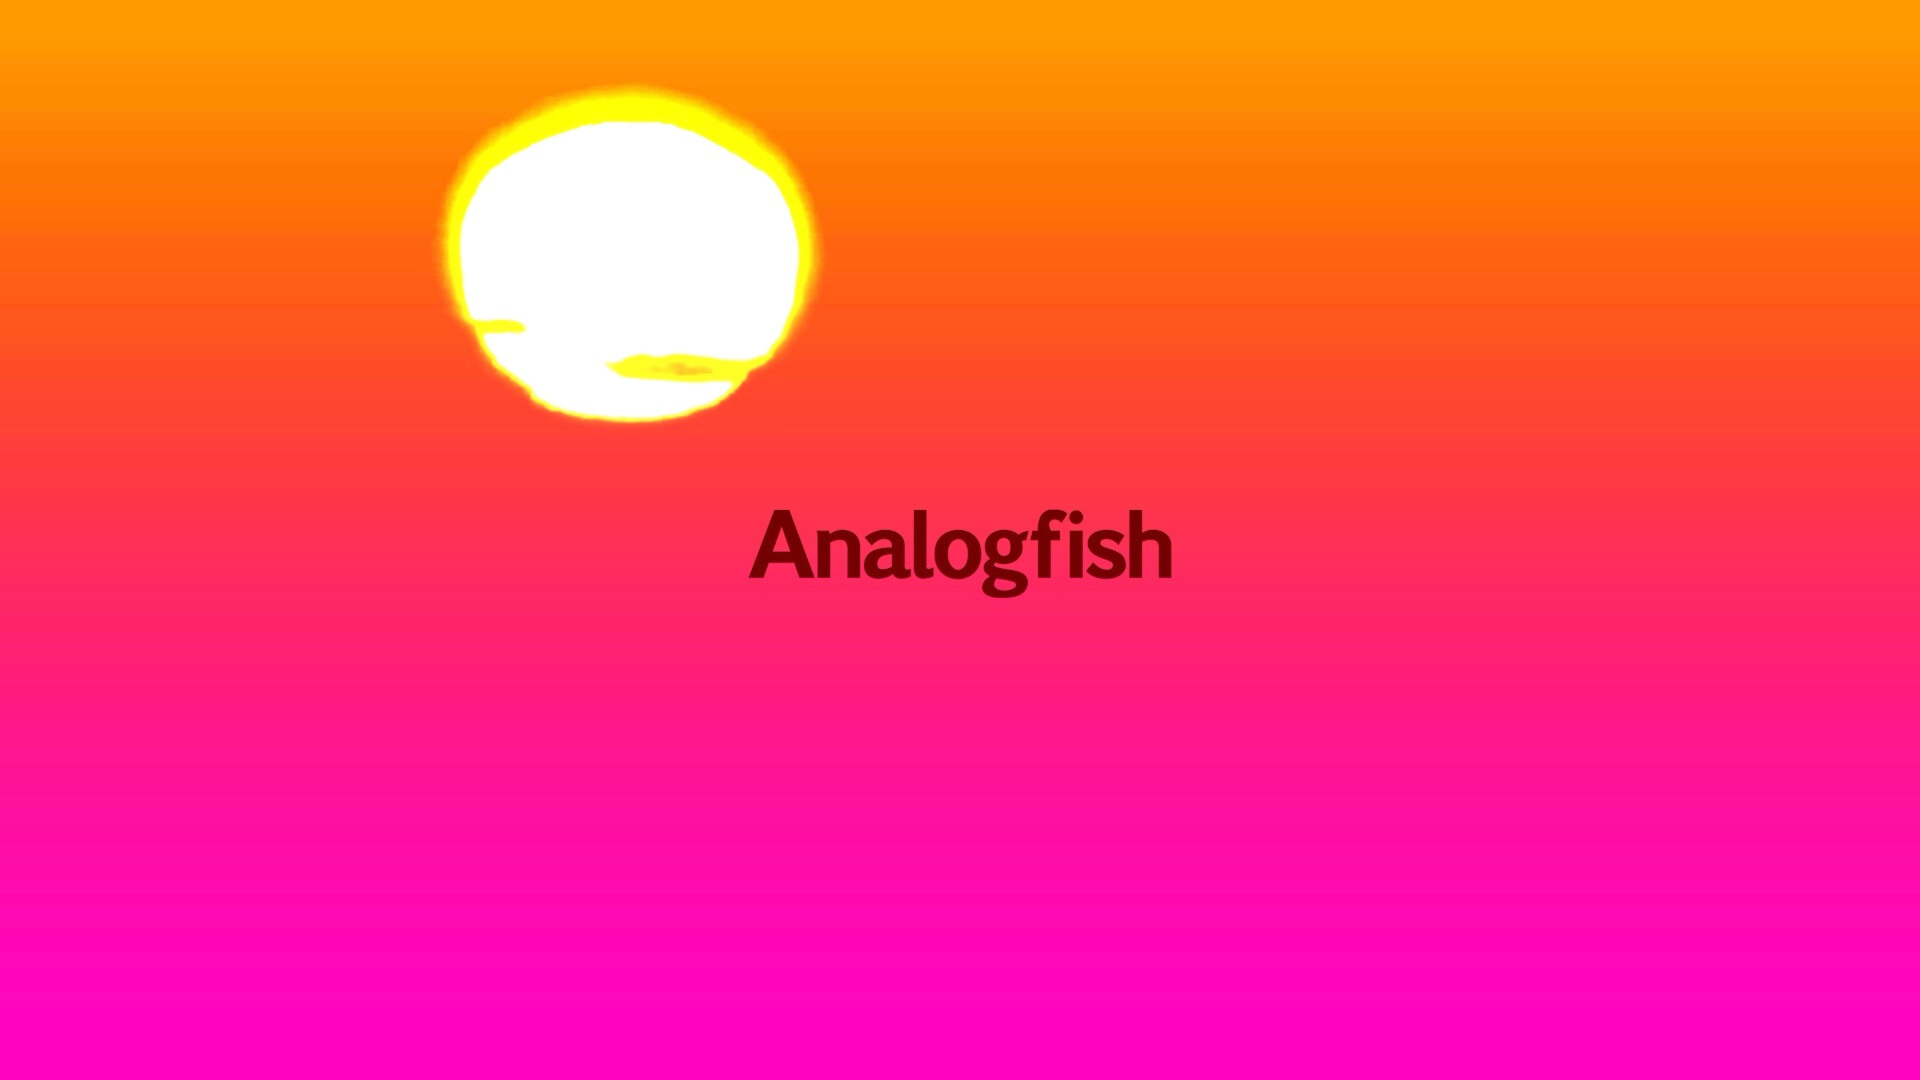 Analogfishのニューアルバムのリリースが決定！収録曲“Is It Too Late？”の先行配信＆リリックビデオのプレミア公開も music211008_analogfish-03